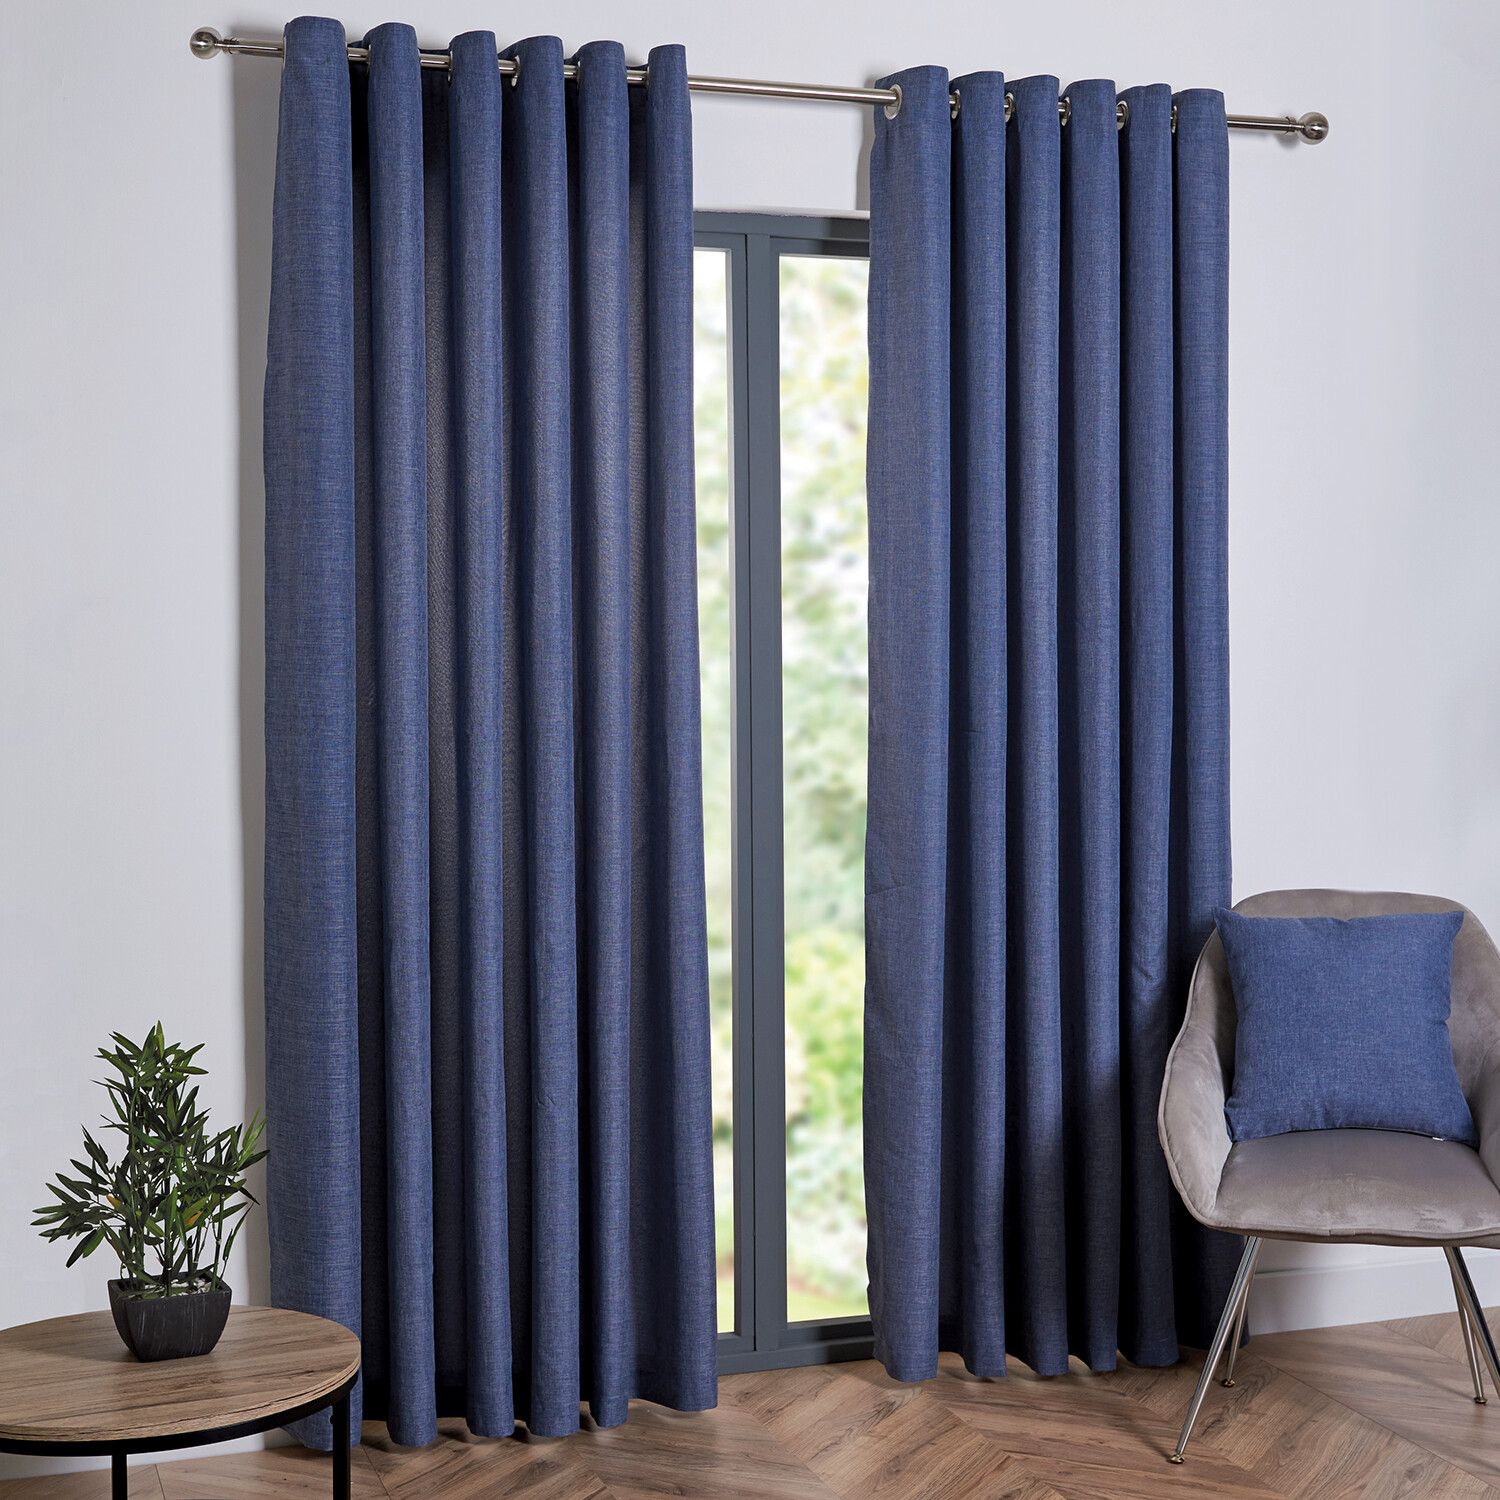 My Home Taylor Navy Eyelet Curtains 168 x 137cm Image 2